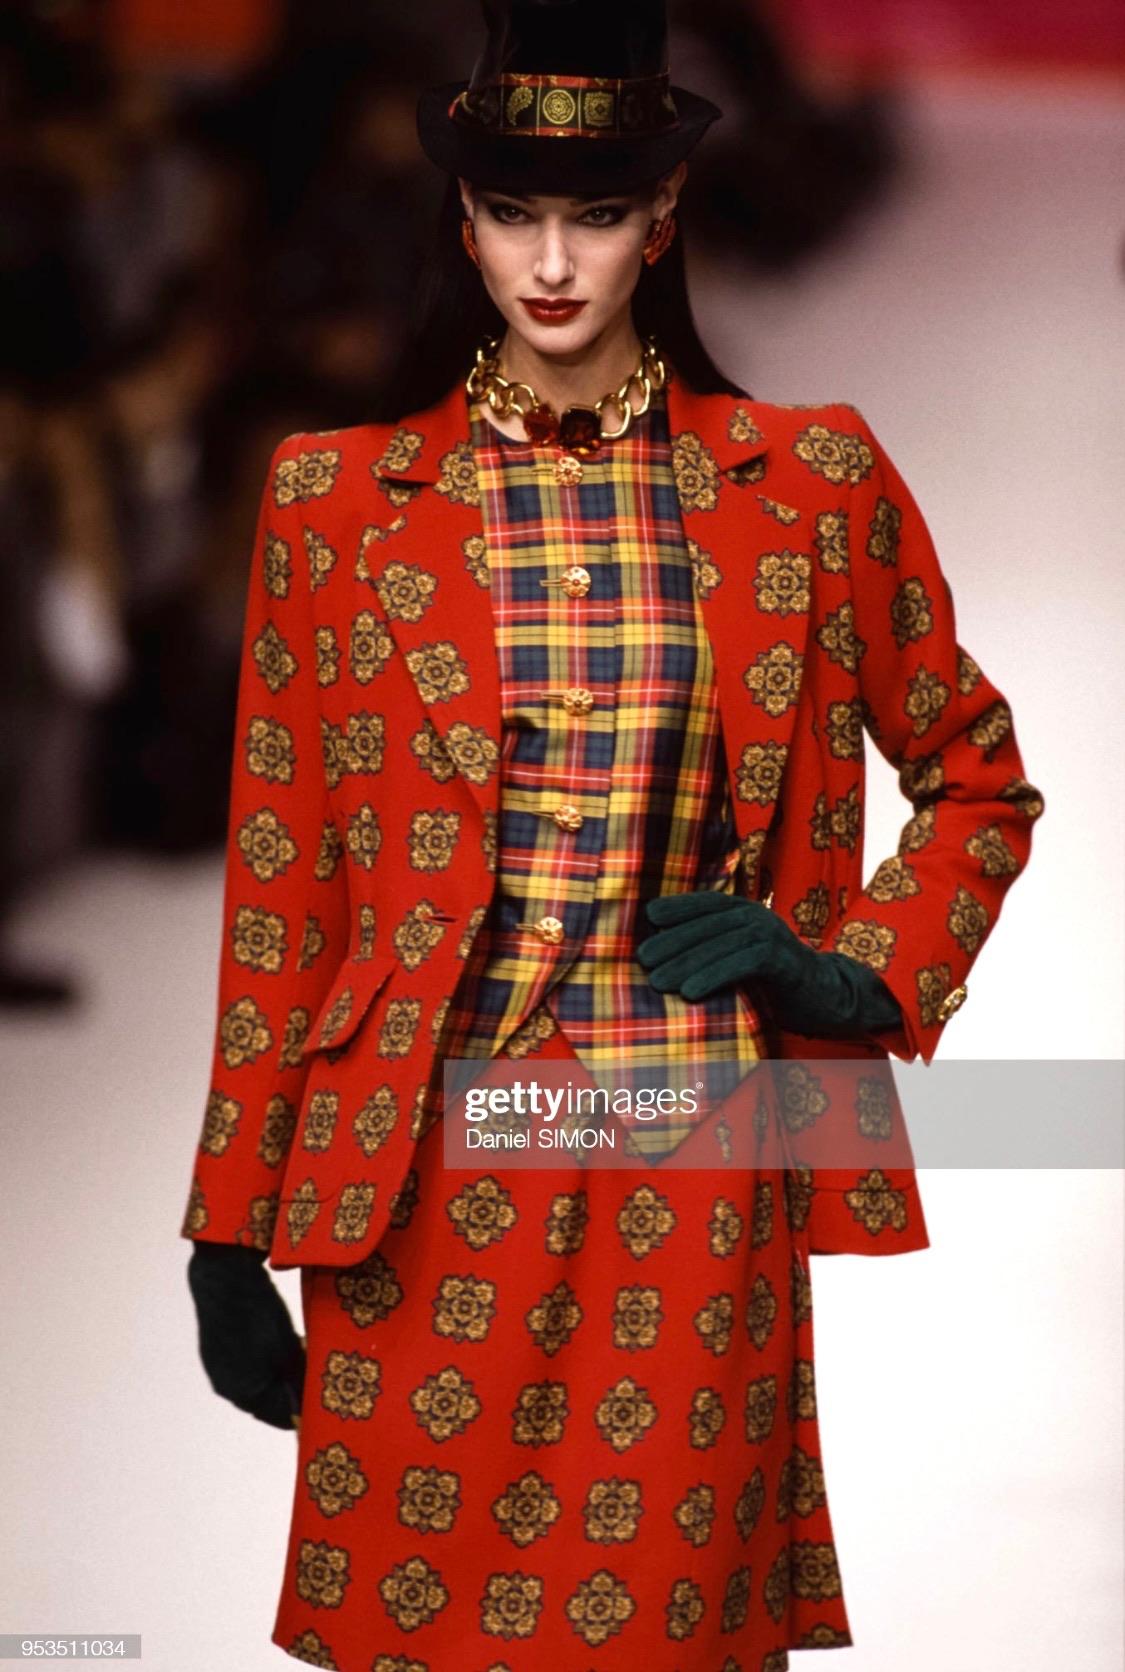 Presenting a fabulous plaid Yves Saint Laurent Rive Gauche blouse and matching scarf. From the Fall/Winter 1995 collection, this top and scarf debuted on the season's runway. This fabulous top features a crew neckline, angular hem, and poof sleeves.